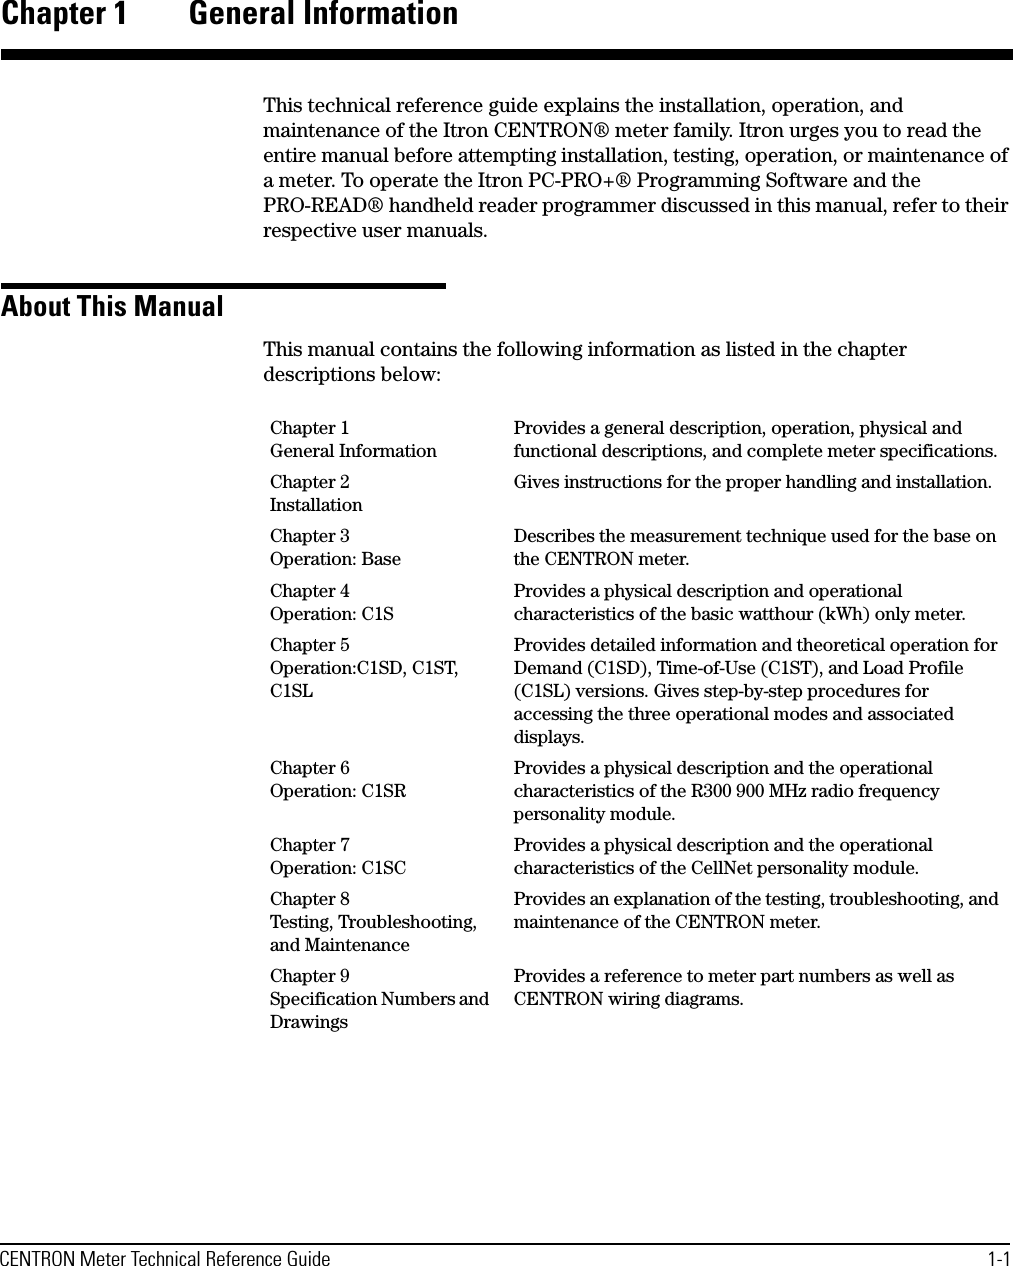 CENTRON Meter Technical Reference Guide 1-1Chapter 1 General InformationThis technical reference guide explains the installation, operation, and maintenance of the Itron CENTRON® meter family. Itron urges you to read the entire manual before attempting installation, testing, operation, or maintenance of a meter. To operate the Itron PC-PRO+® Programming Software and the PRO-READ® handheld reader programmer discussed in this manual, refer to their respective user manuals.About This ManualThis manual contains the following information as listed in the chapter descriptions below:Chapter 1 General InformationProvides a general description, operation, physical and functional descriptions, and complete meter specifications.Chapter 2 InstallationGives instructions for the proper handling and installation.Chapter 3 Operation: BaseDescribes the measurement technique used for the base on the CENTRON meter.Chapter 4 Operation: C1SProvides a physical description and operational characteristics of the basic watthour (kWh) only meter.Chapter 5 Operation:C1SD, C1ST, C1SLProvides detailed information and theoretical operation for Demand (C1SD), Time-of-Use (C1ST), and Load Profile (C1SL) versions. Gives step-by-step procedures for accessing the three operational modes and associated displays.Chapter 6 Operation: C1SRProvides a physical description and the operational characteristics of the R300 900 MHz radio frequency personality module.Chapter 7 Operation: C1SCProvides a physical description and the operational characteristics of the CellNet personality module.Chapter 8 Testing, Troubleshooting, and MaintenanceProvides an explanation of the testing, troubleshooting, and maintenance of the CENTRON meter.Chapter 9 Specification Numbers and DrawingsProvides a reference to meter part numbers as well as CENTRON wiring diagrams.